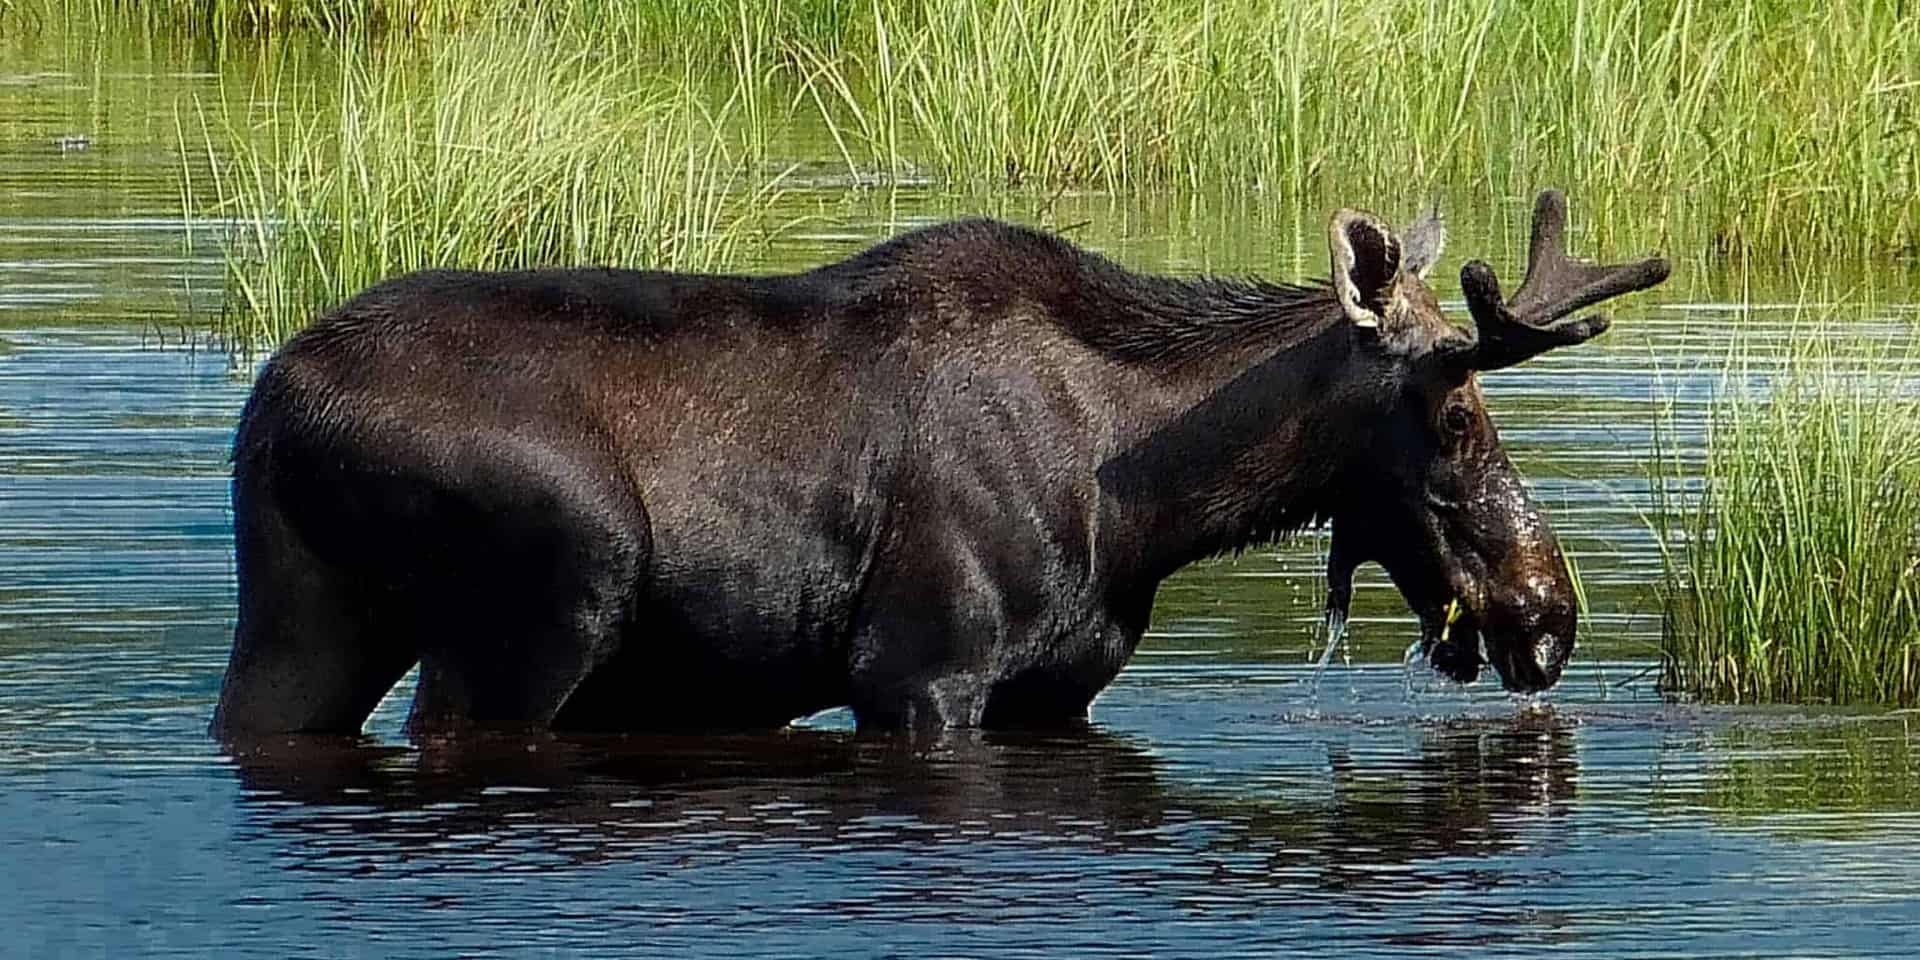 Elk drink water from the lake